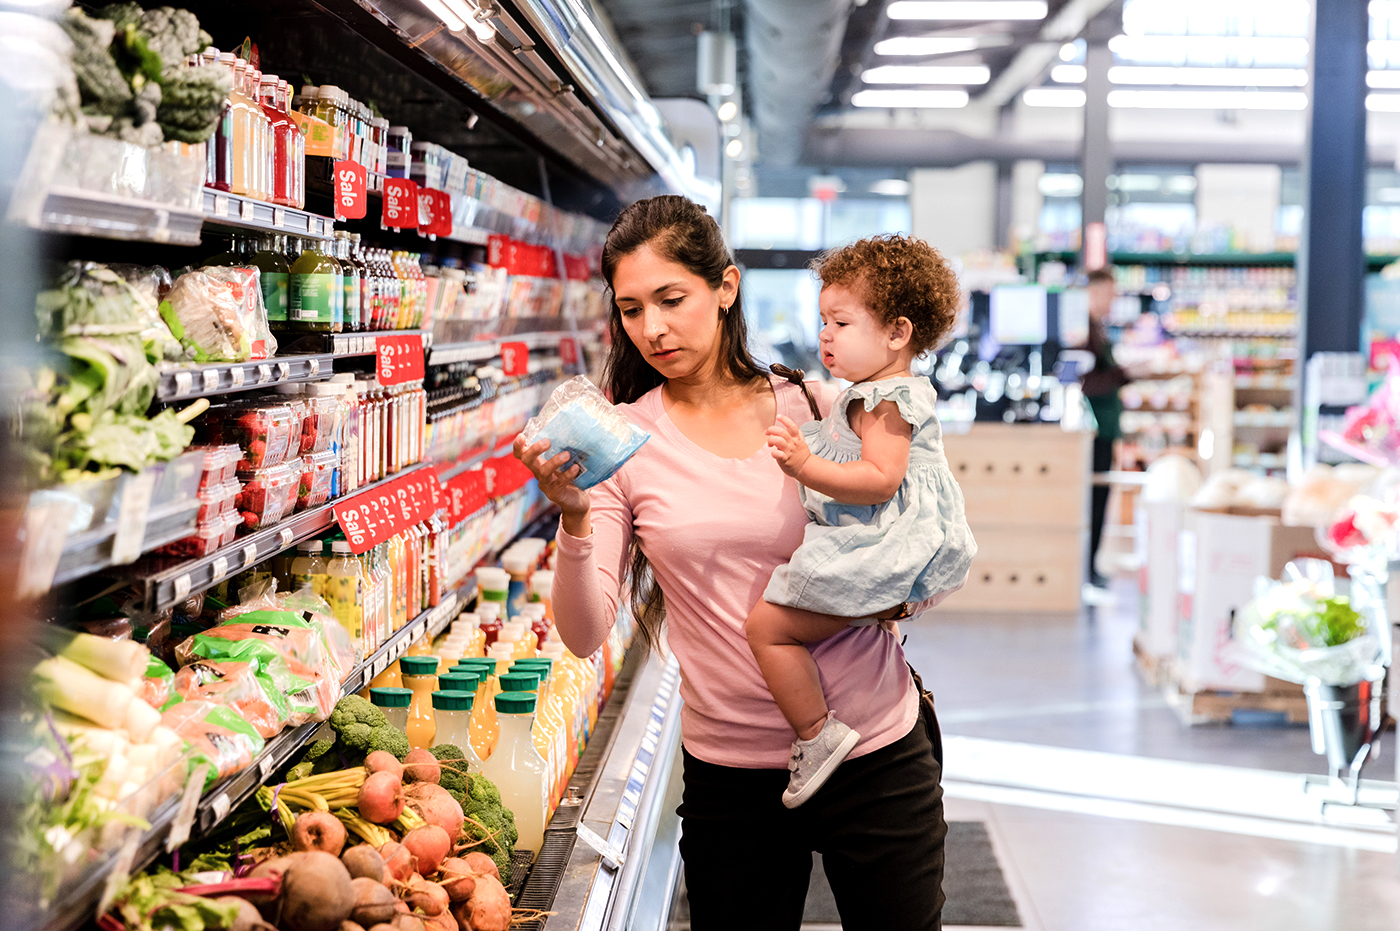 Woman holding child examining produce at the grocery store